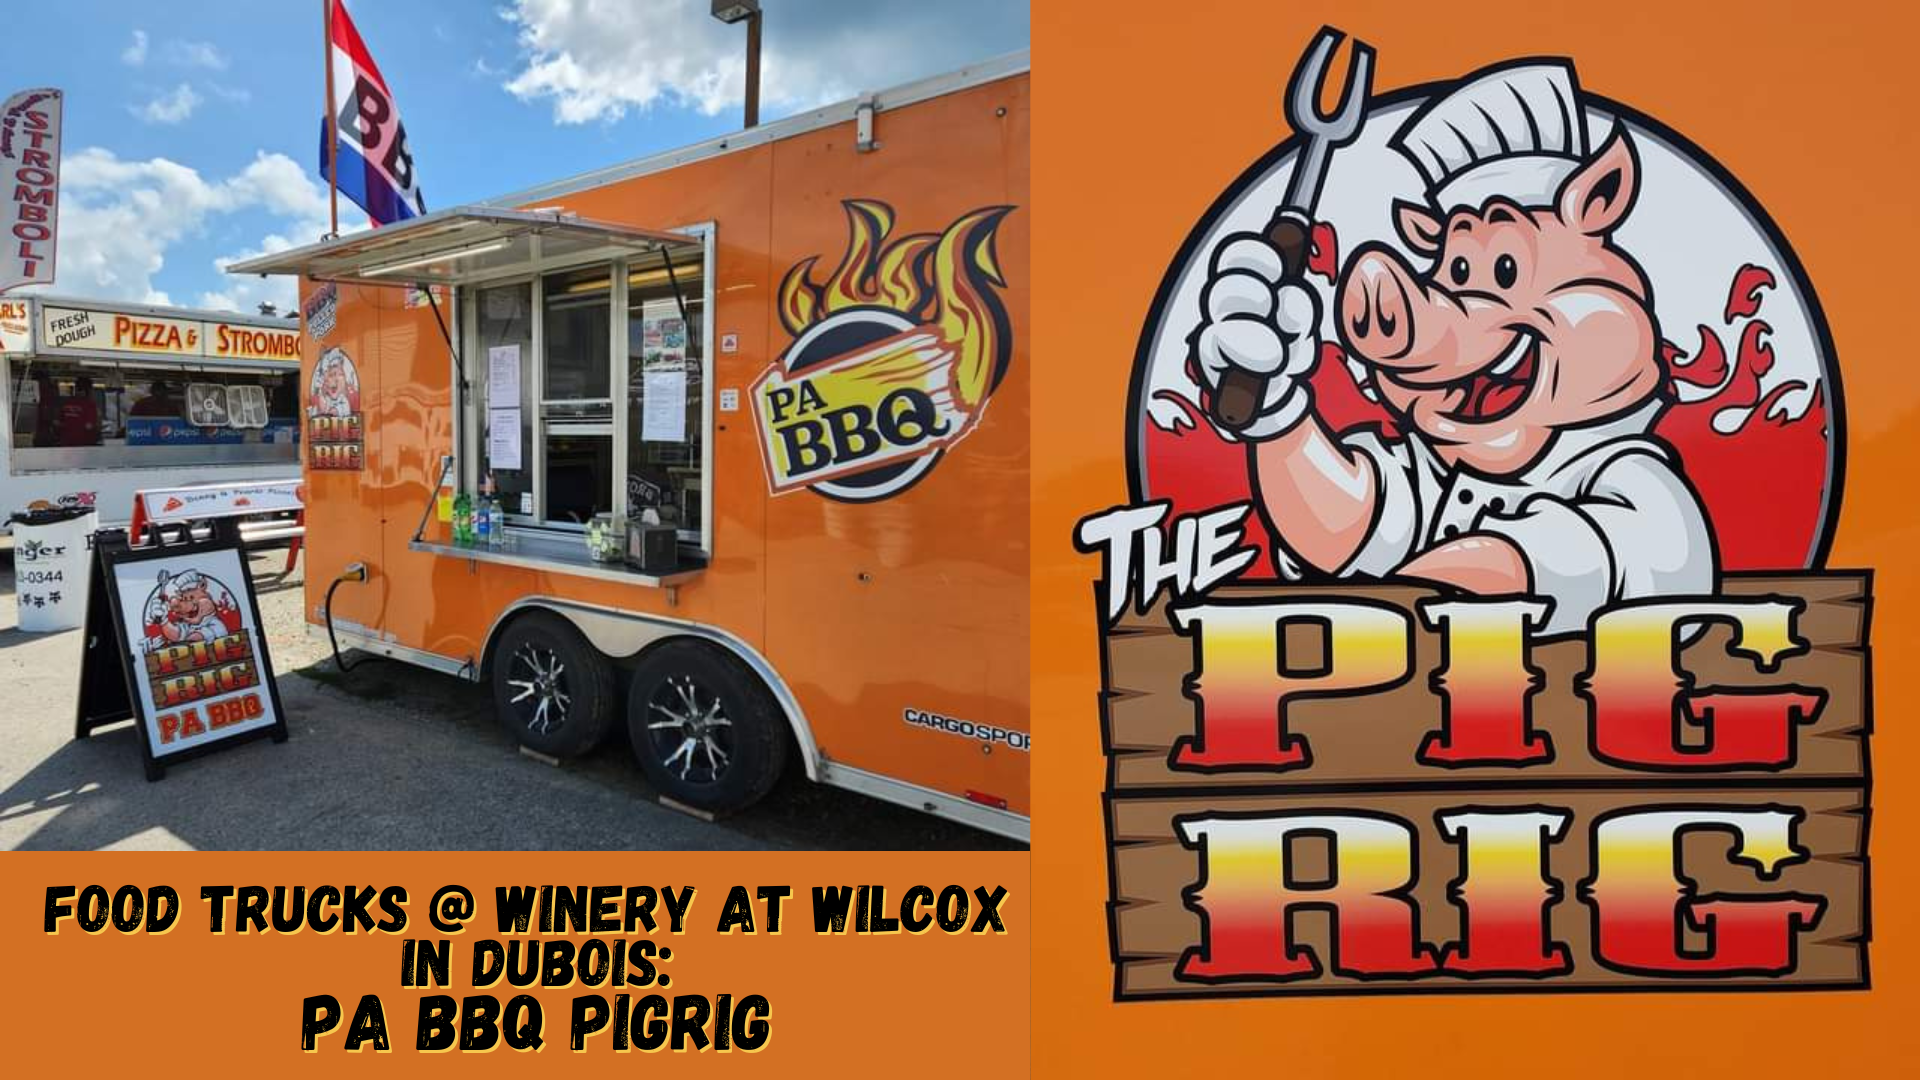 Food Trucks @ Winery at Wilcox in DuBois – PA BBQ PigRig